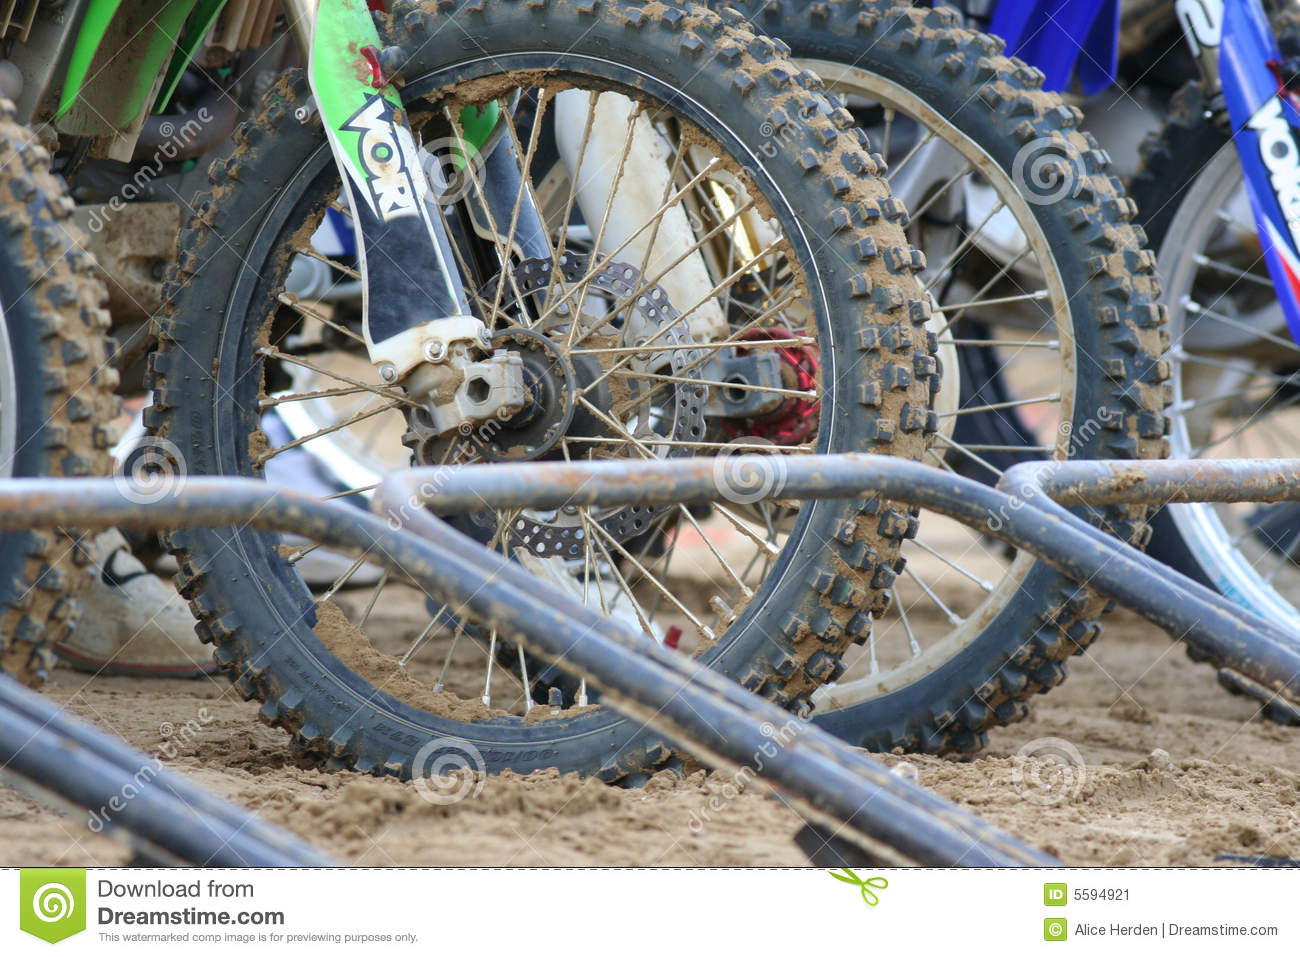 Image Of Motocross Dirt Bike Abstract Style Dirt Bike Wheels At The